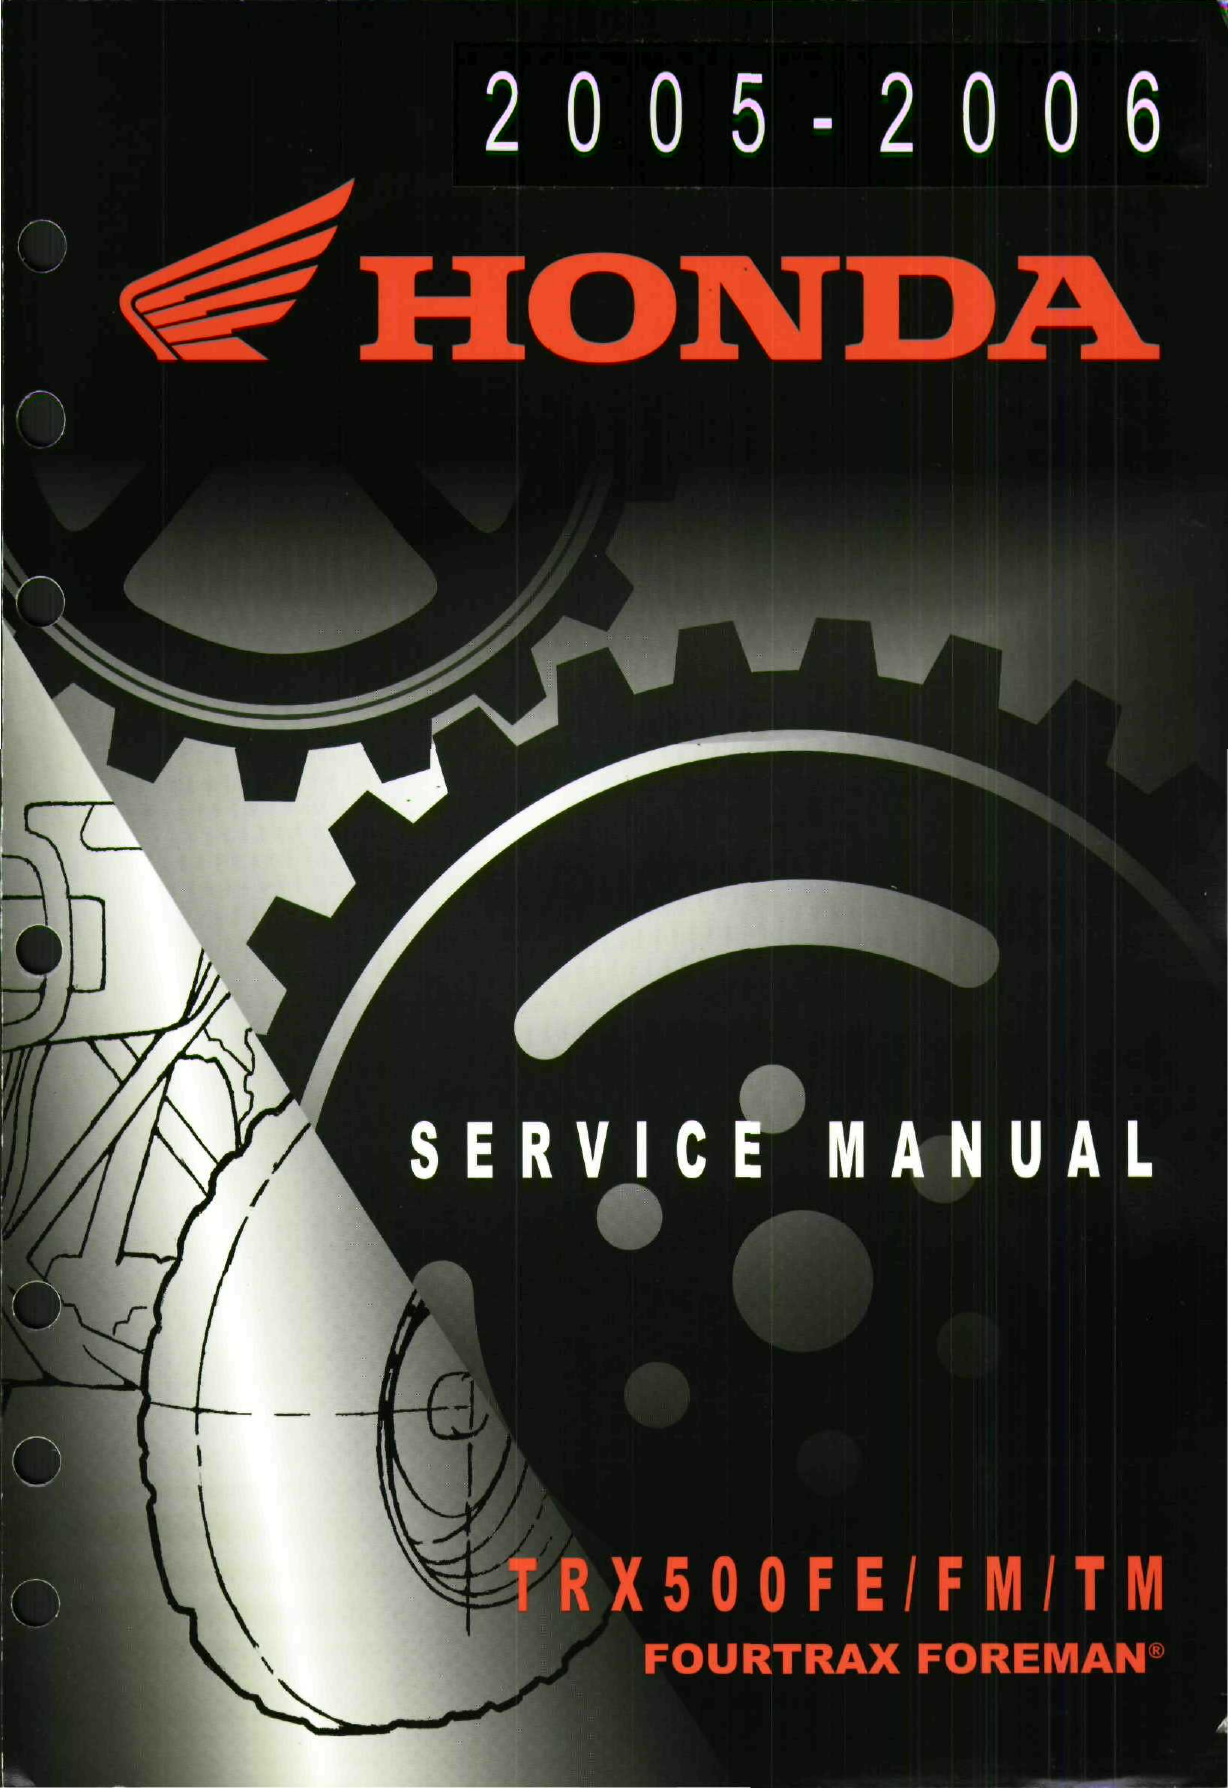 2005-2006 Honda Fourtrax Foreman 500 factory service manual Preview image 2